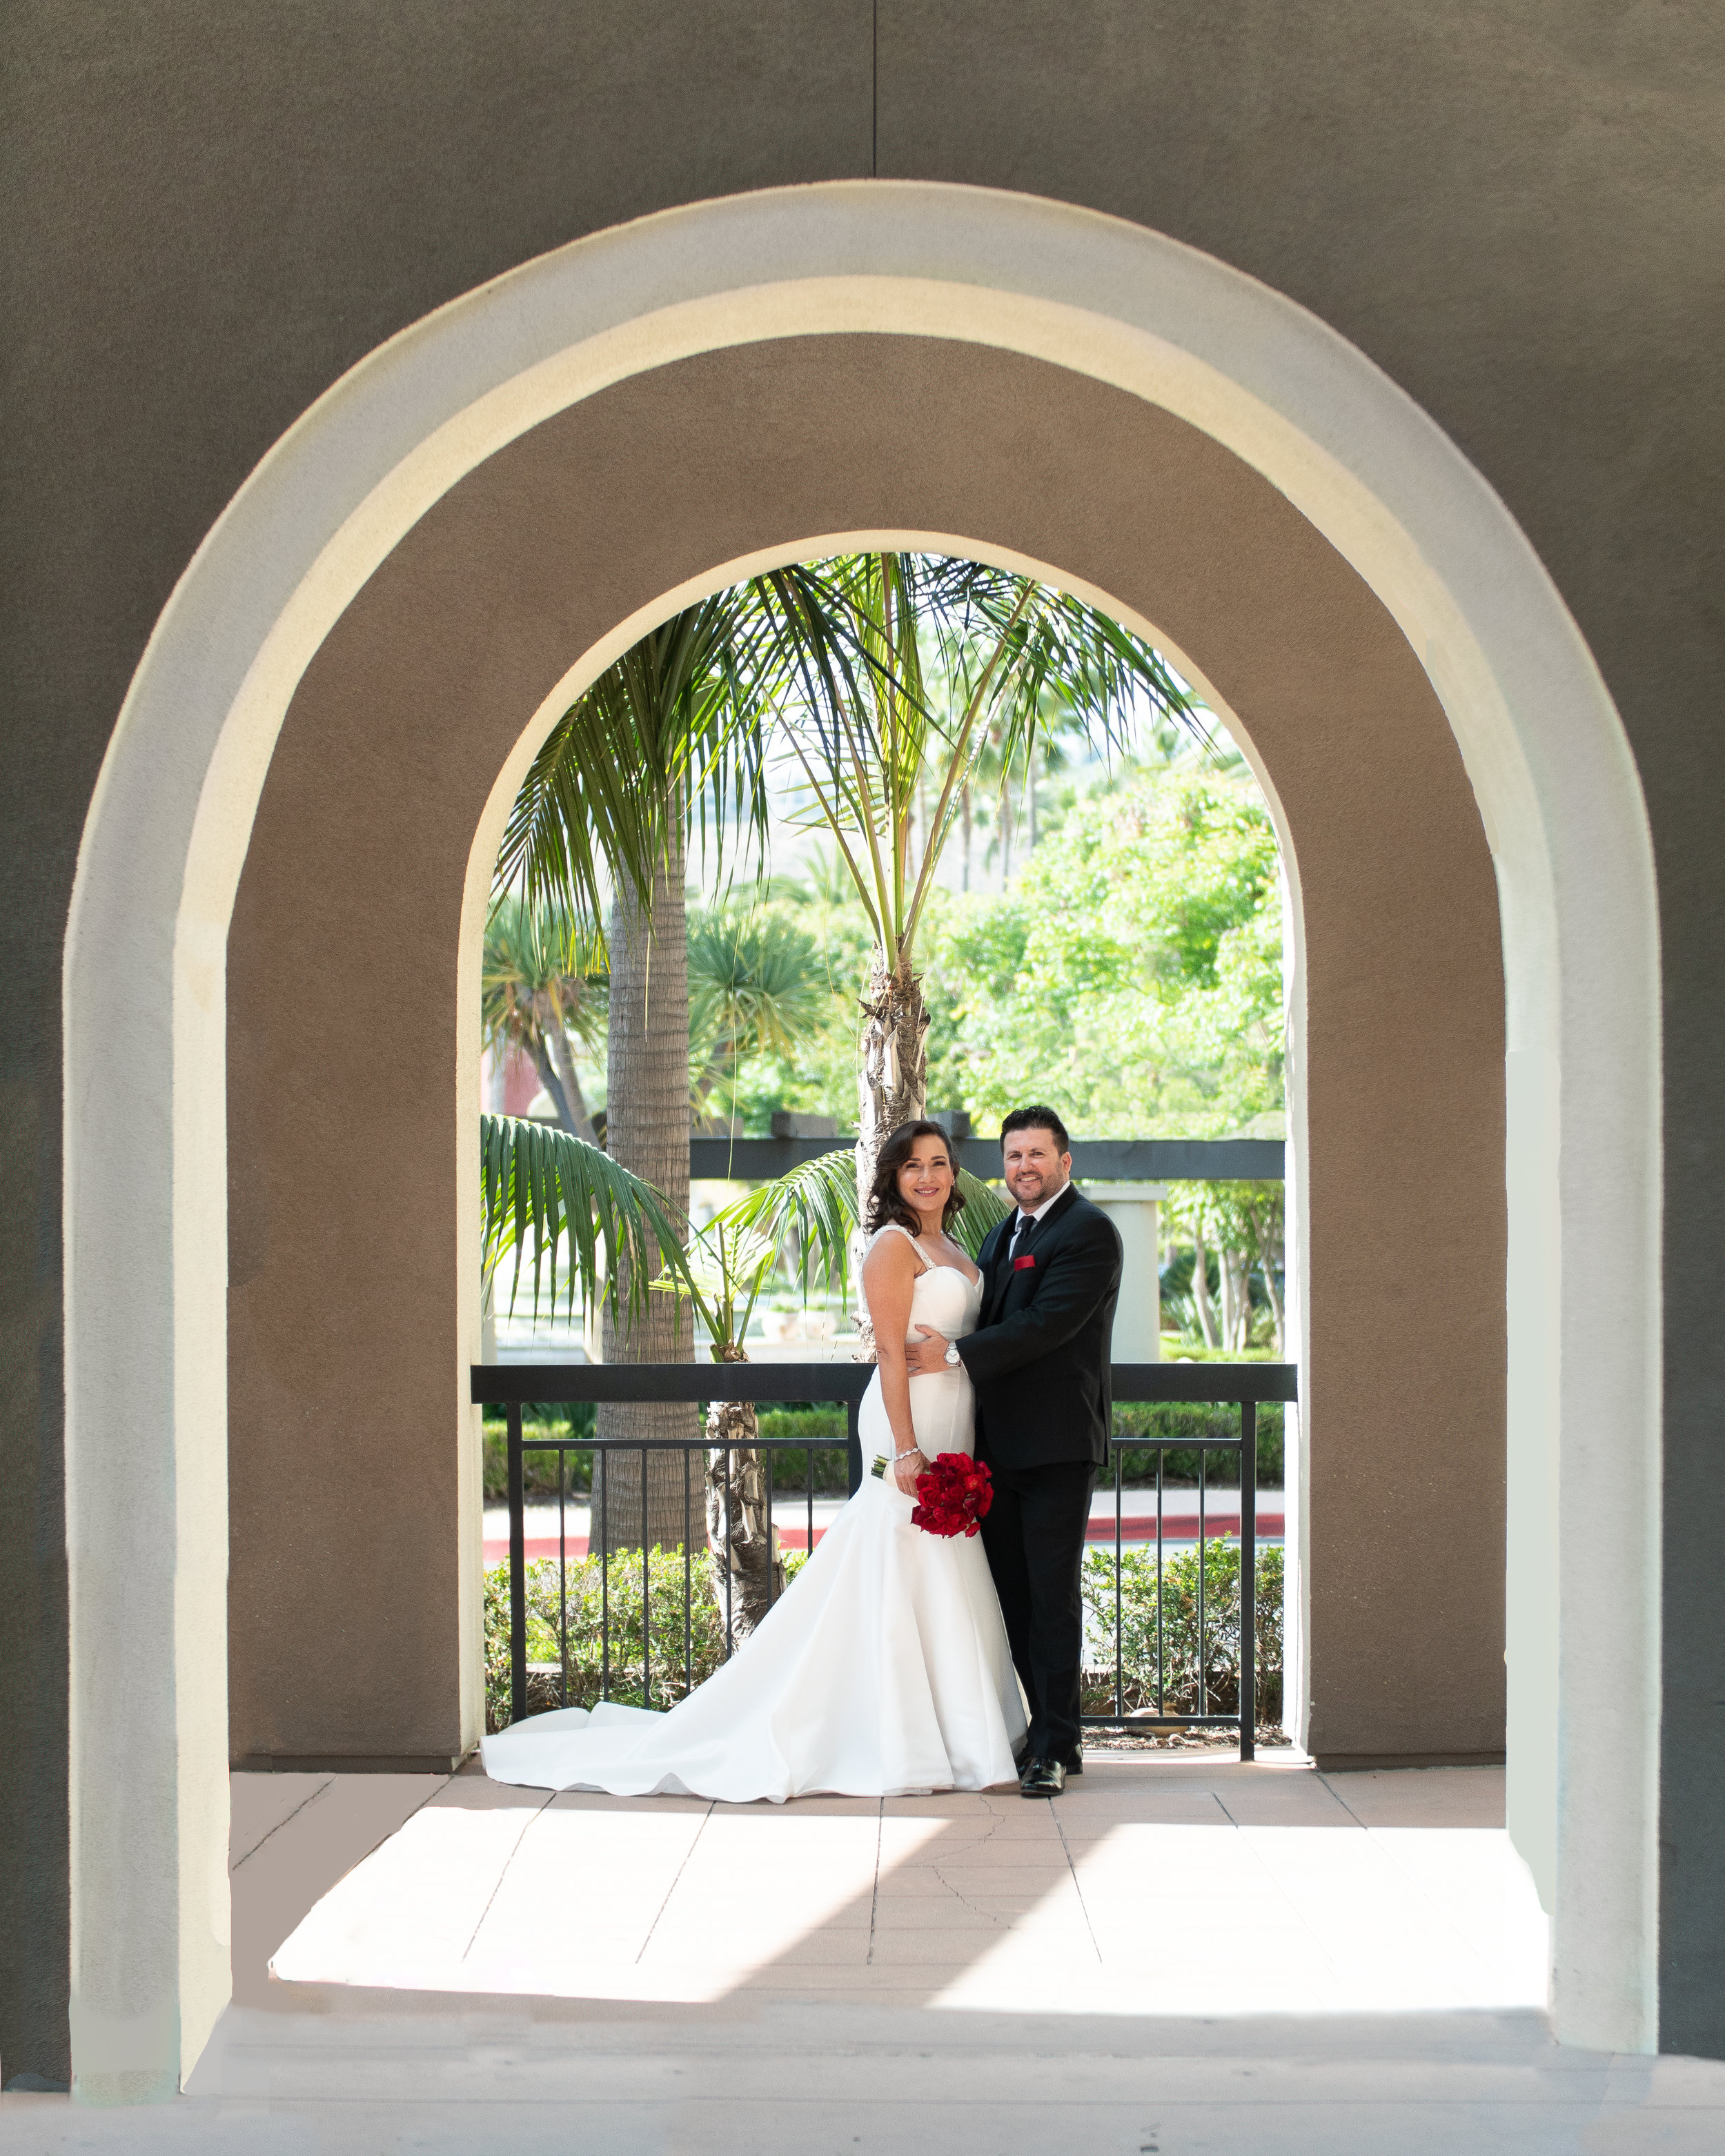 Wedding - Stan and Mayte - 6-28-19 - rev 7-19-19 - 72dpi - ok for Internet - Web Sites - Social Media - Cell Phone Viewing etc-27.jpg